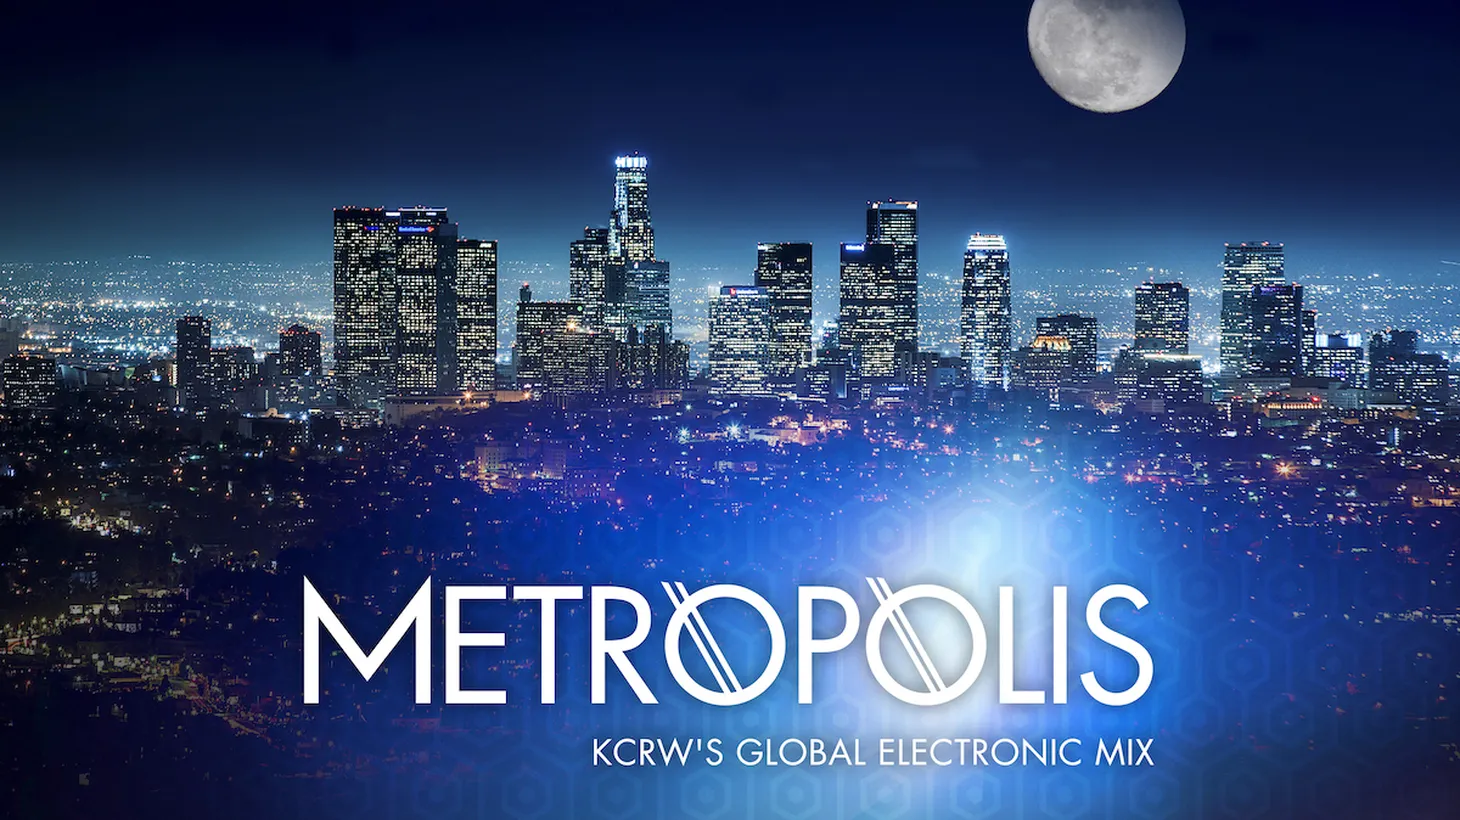 Metropolis this week a fresh crop of tunes including the return of UK duo Bent, Moon Boots, Groove Armada, Lane 8 remixed, Bonobo teams up with TEED, Rinzen, and more….